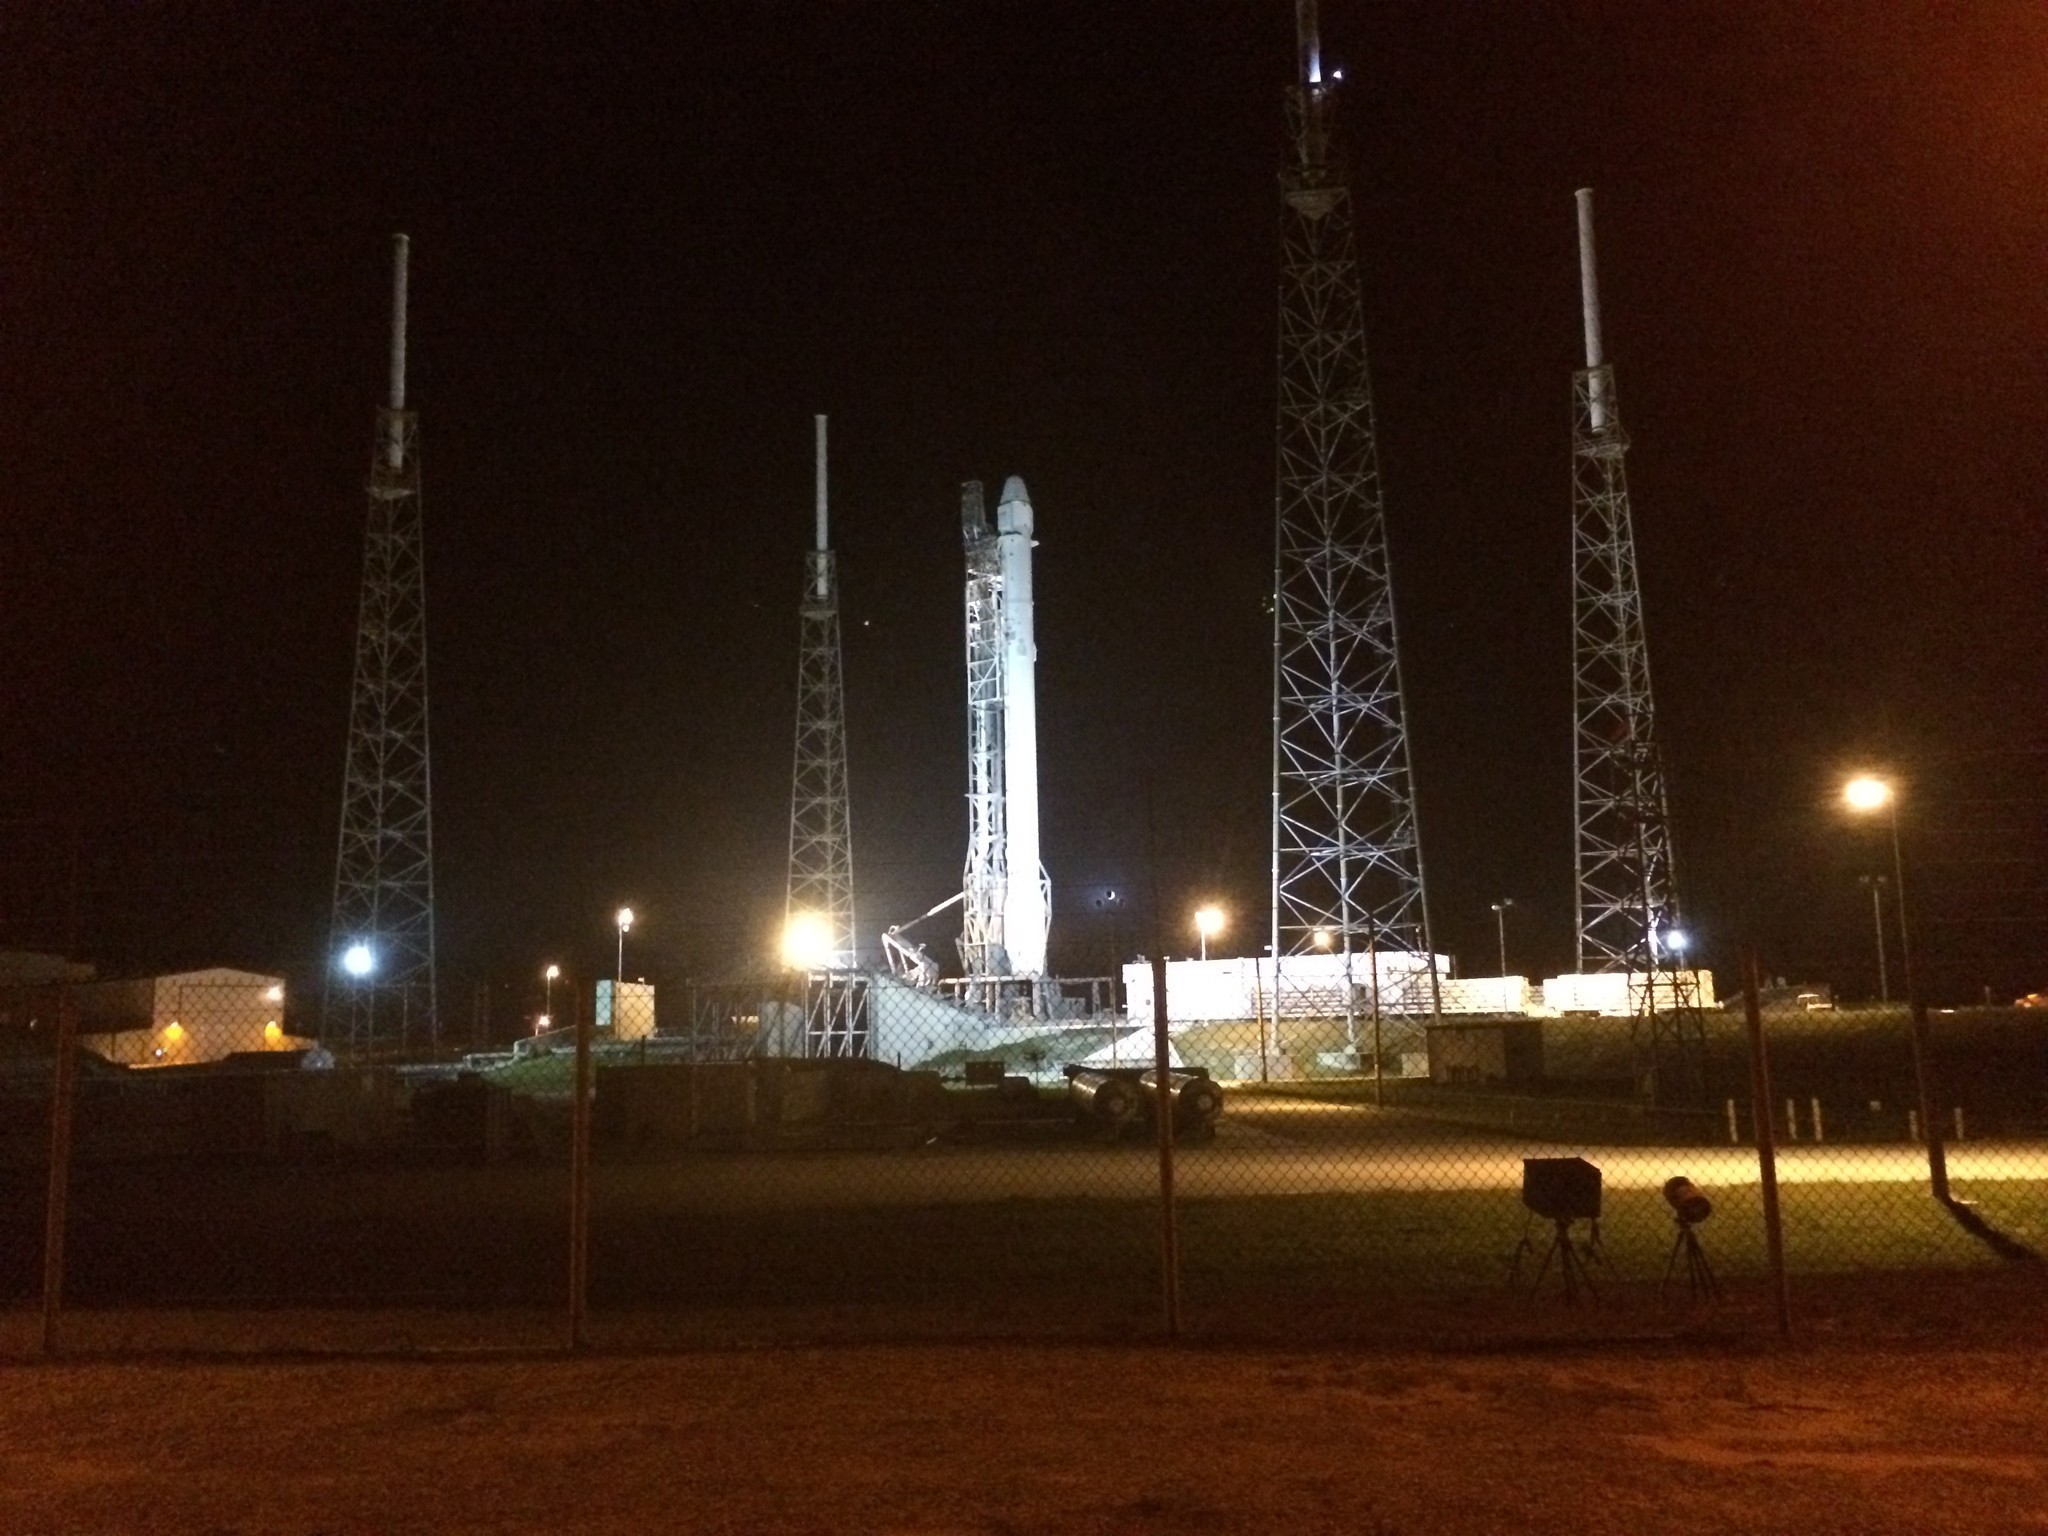 Watch live: SpaceX Falcon 9 launch from Cape Canaveral - Orlando Sentinel2048 x 1536